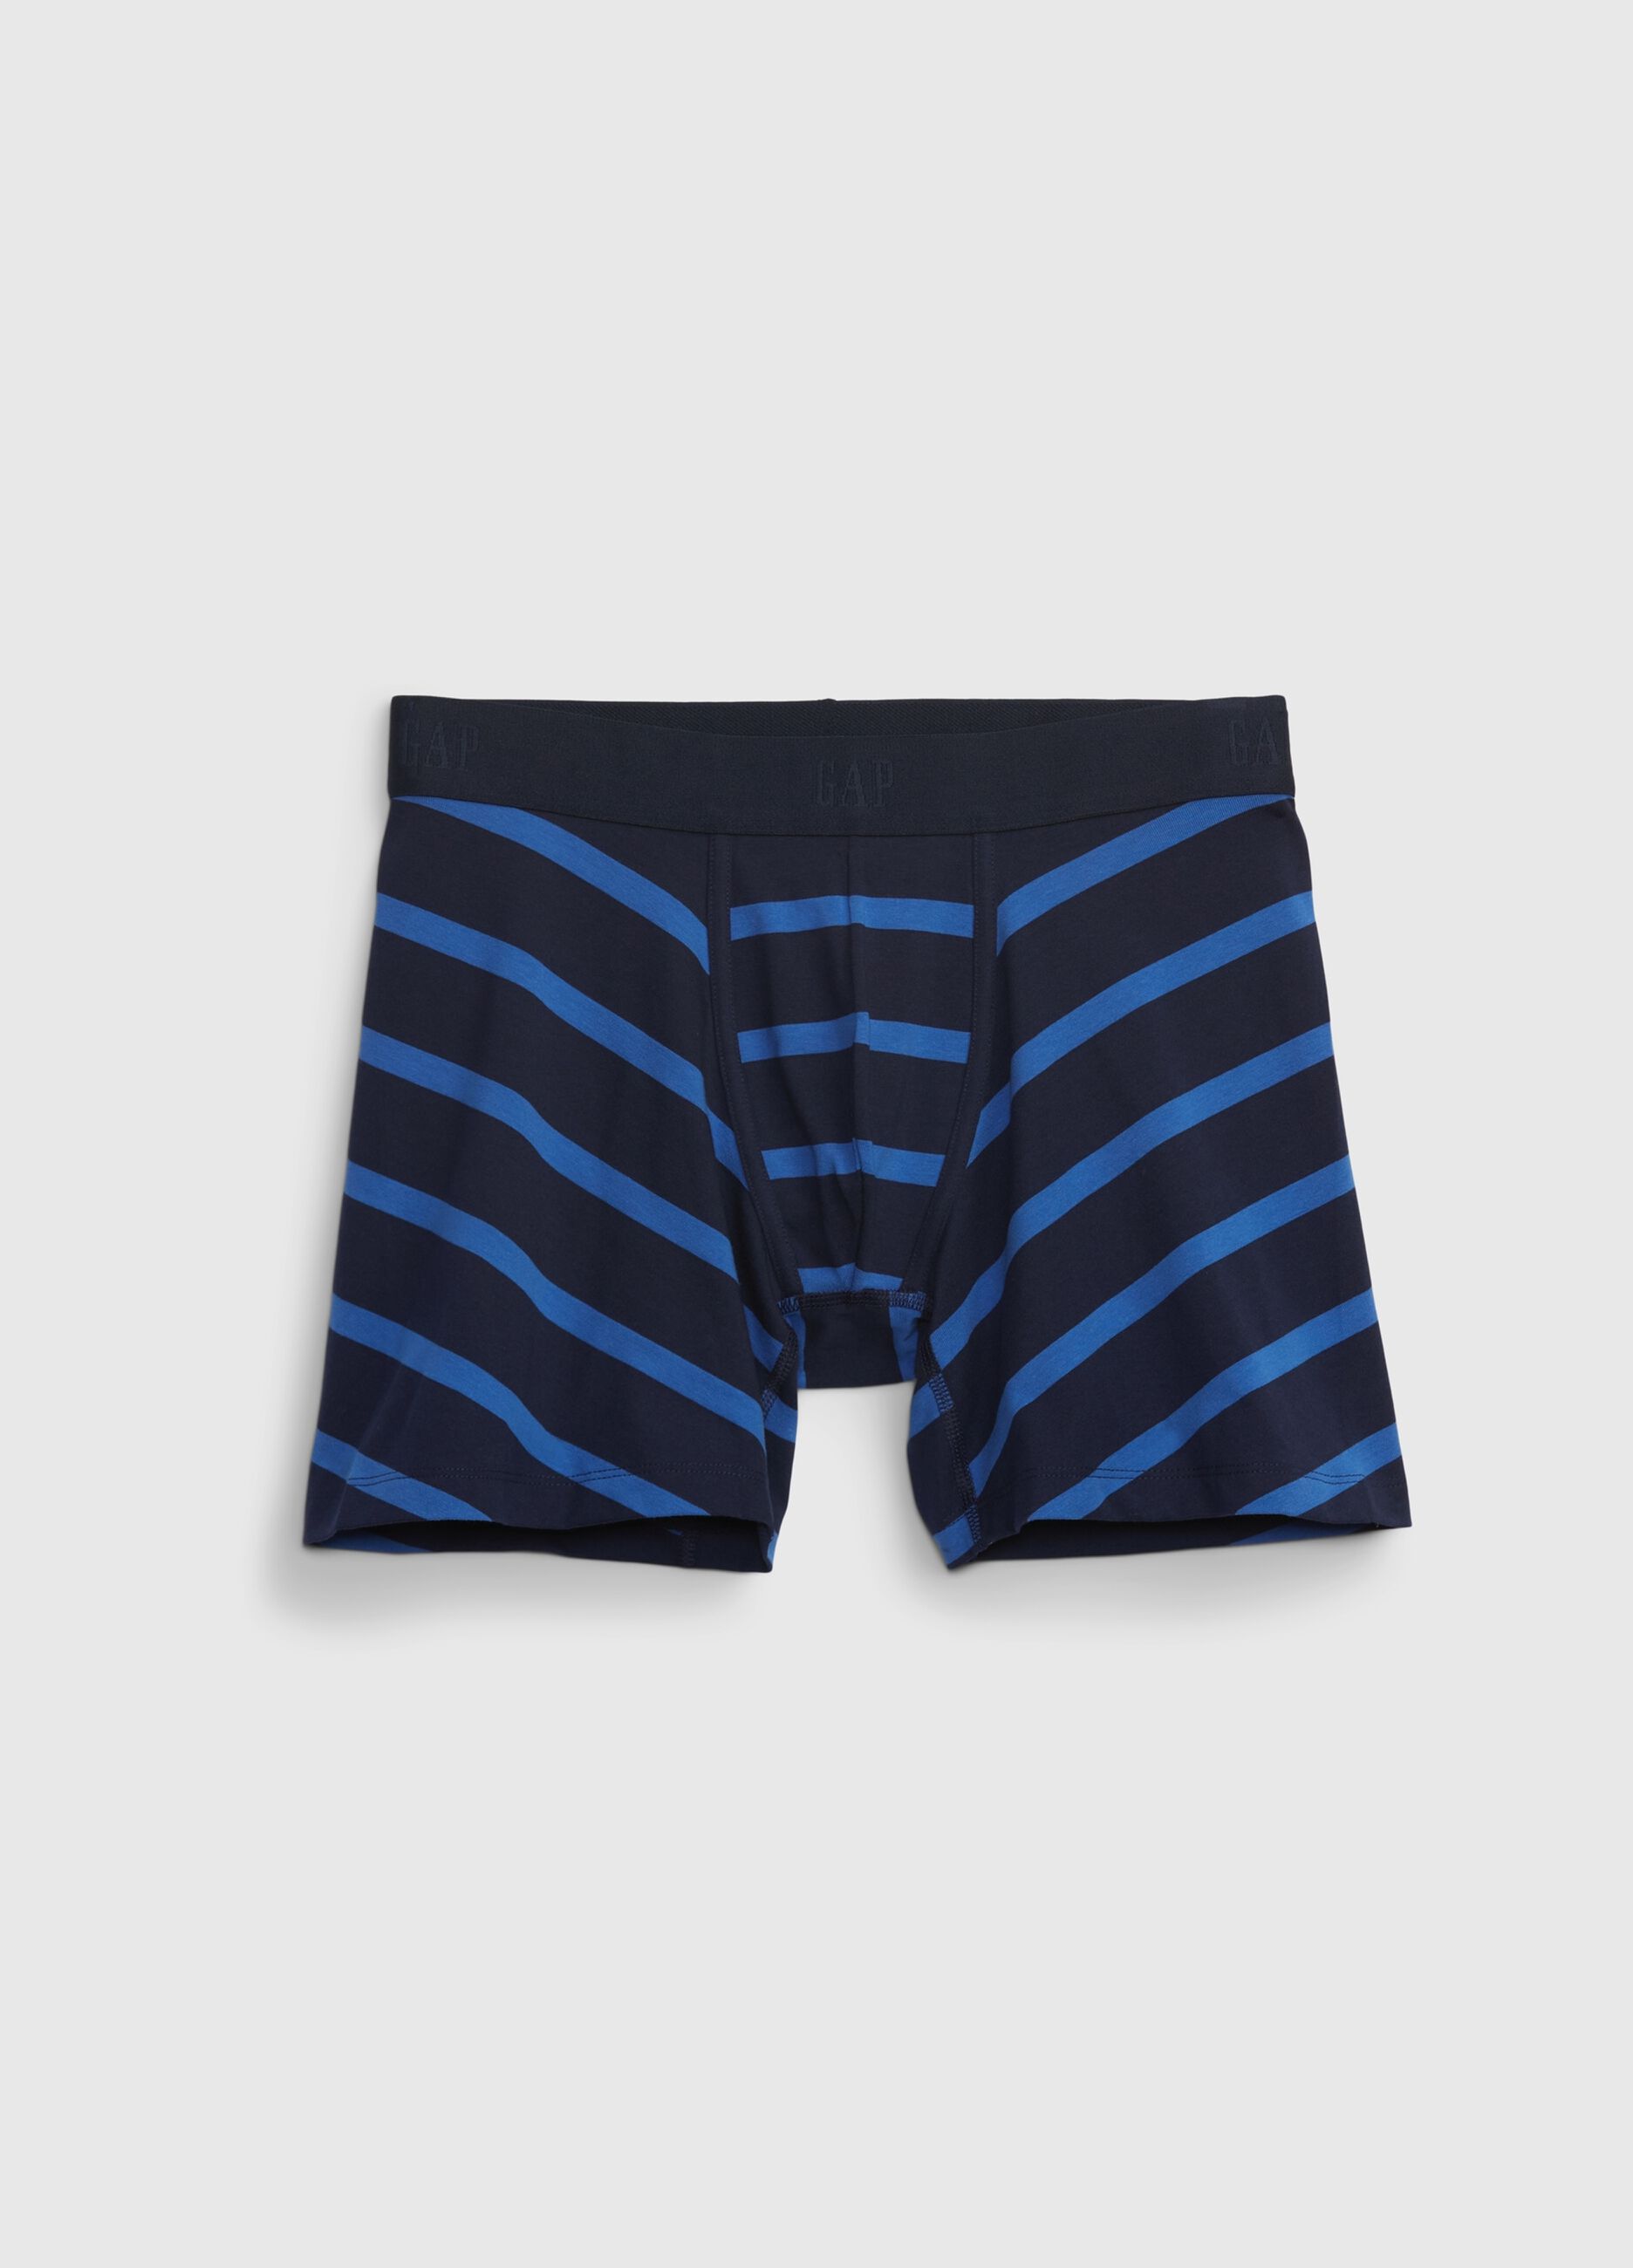 Boxer shorts with striped pattern